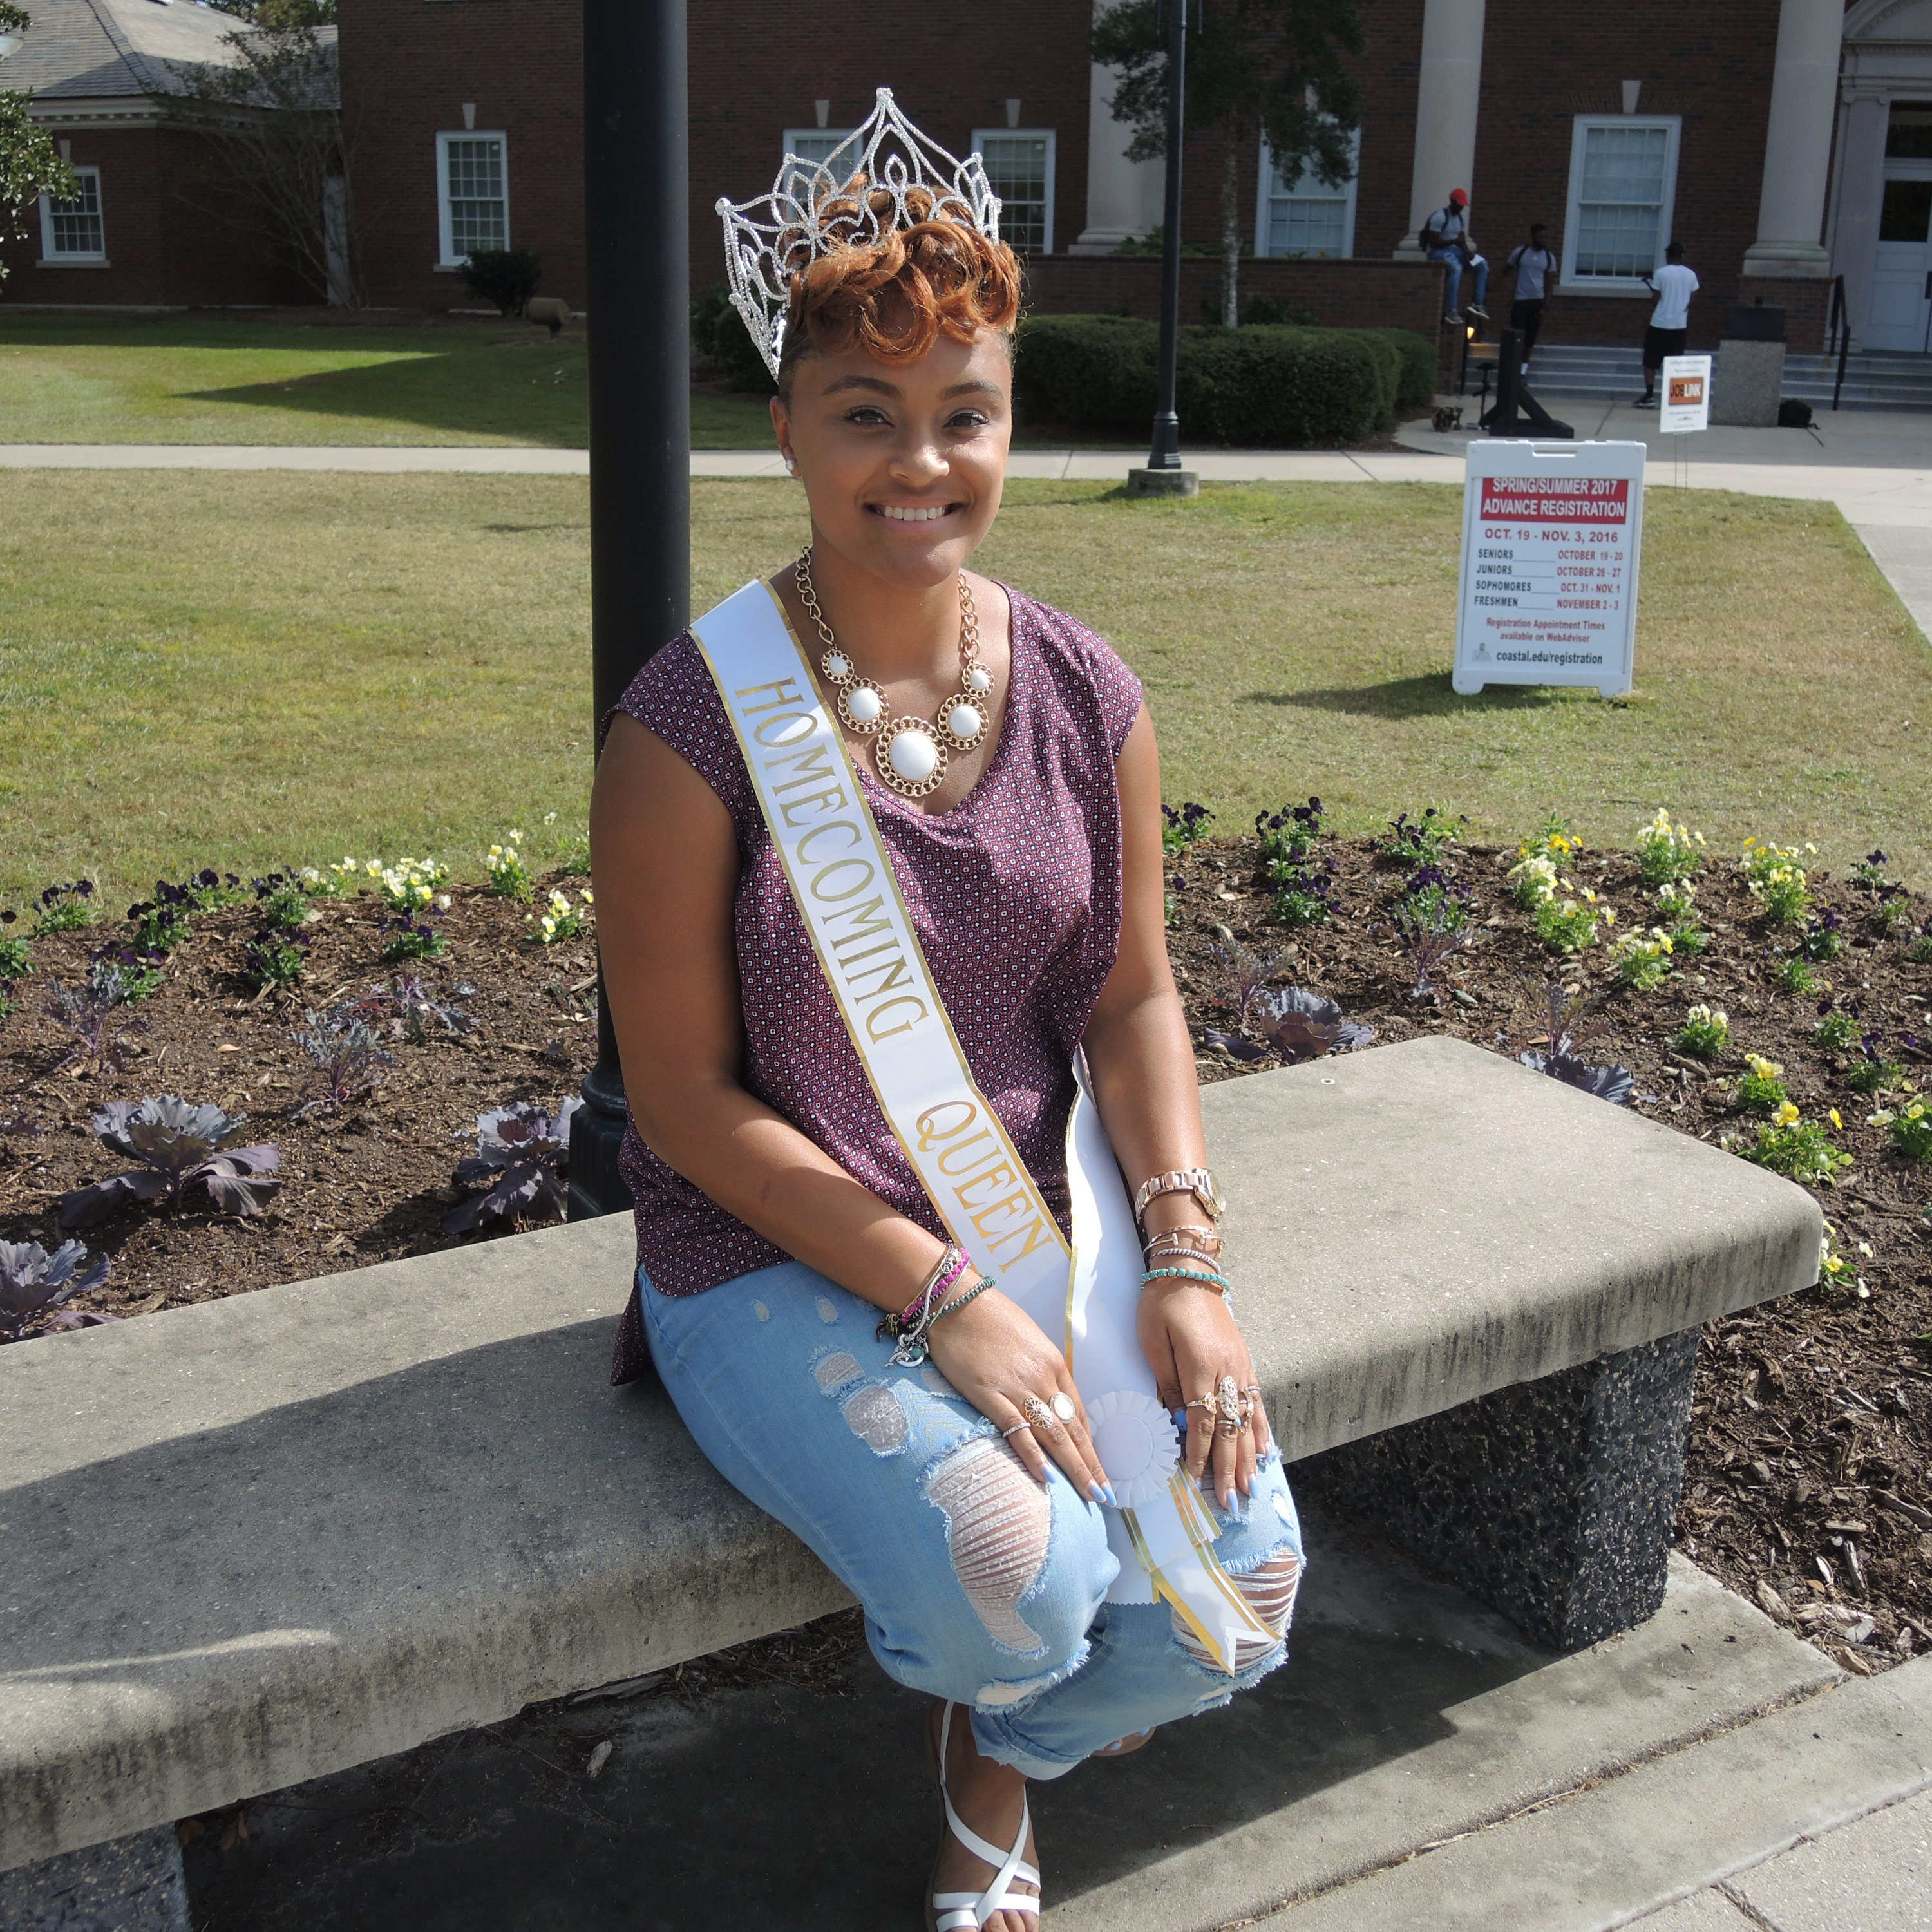 Shayla was named the 2016 Homecoming Queen